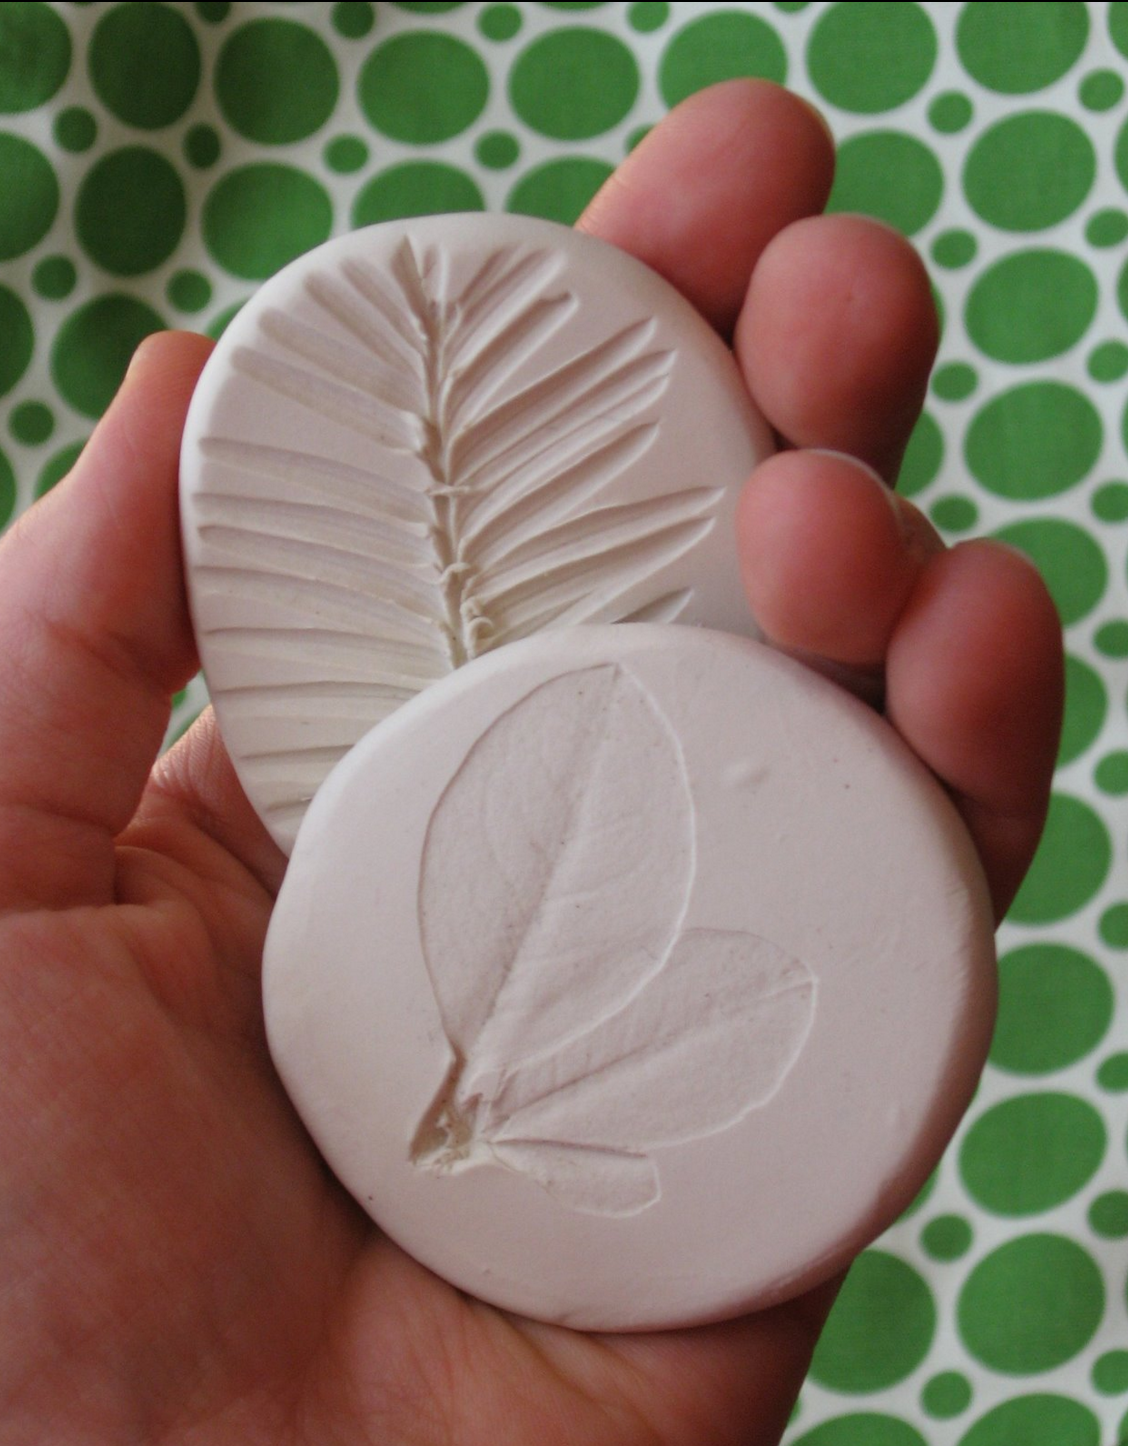 DIY Projects: 15 Creative ways to celebrate Earth Day